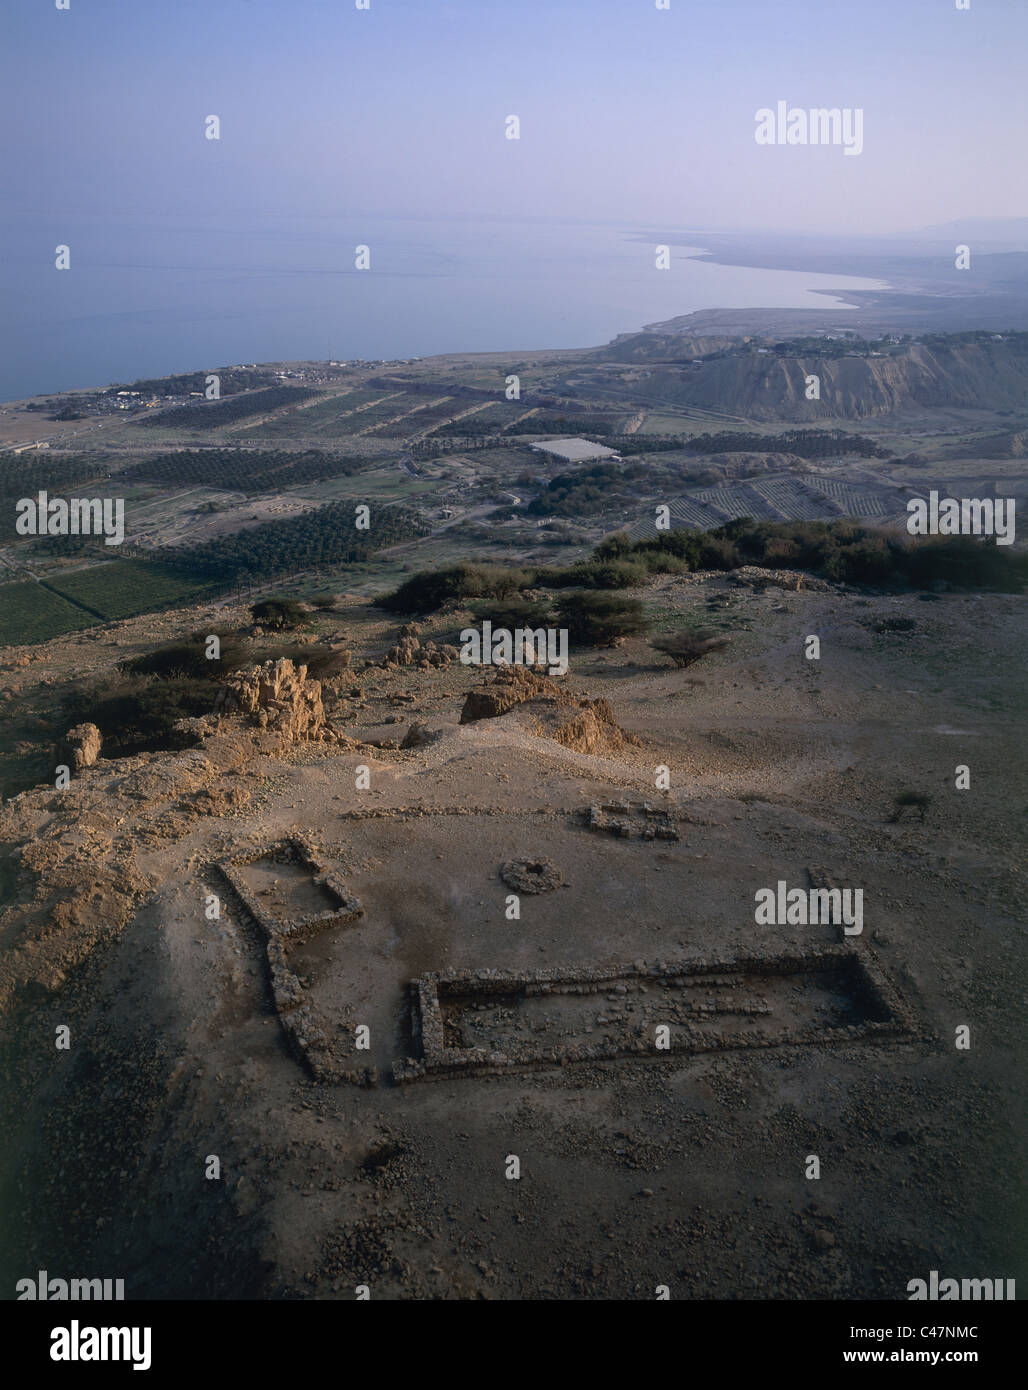 Aerial photograph of an ancient ruins near the oasis of Ein Gedi Stock Photo